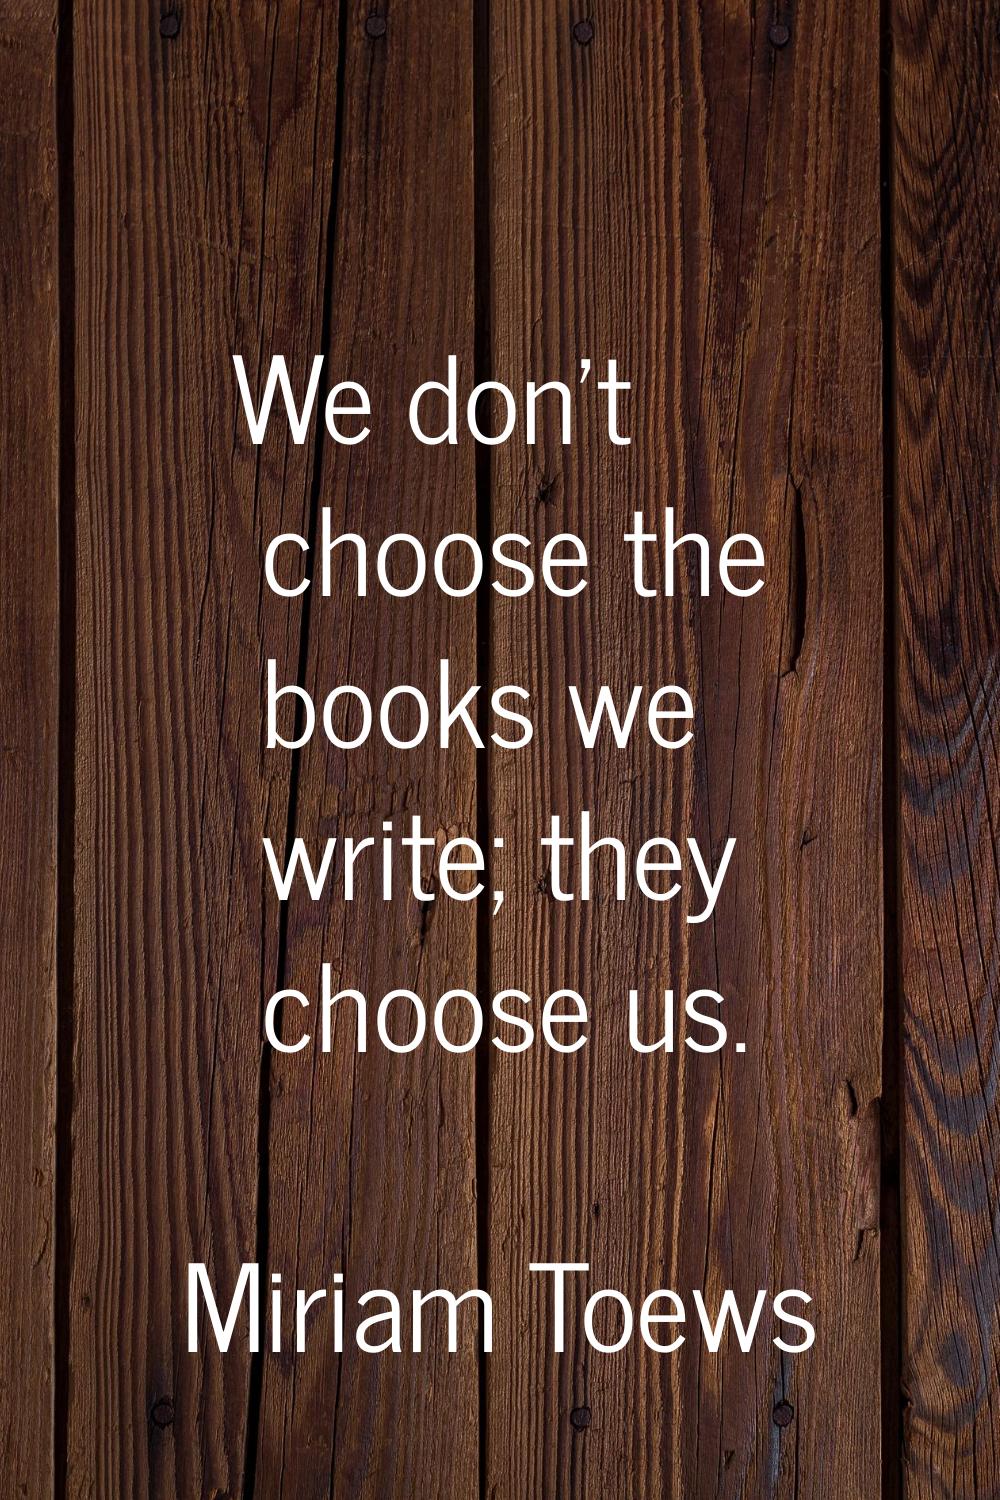 We don't choose the books we write; they choose us.